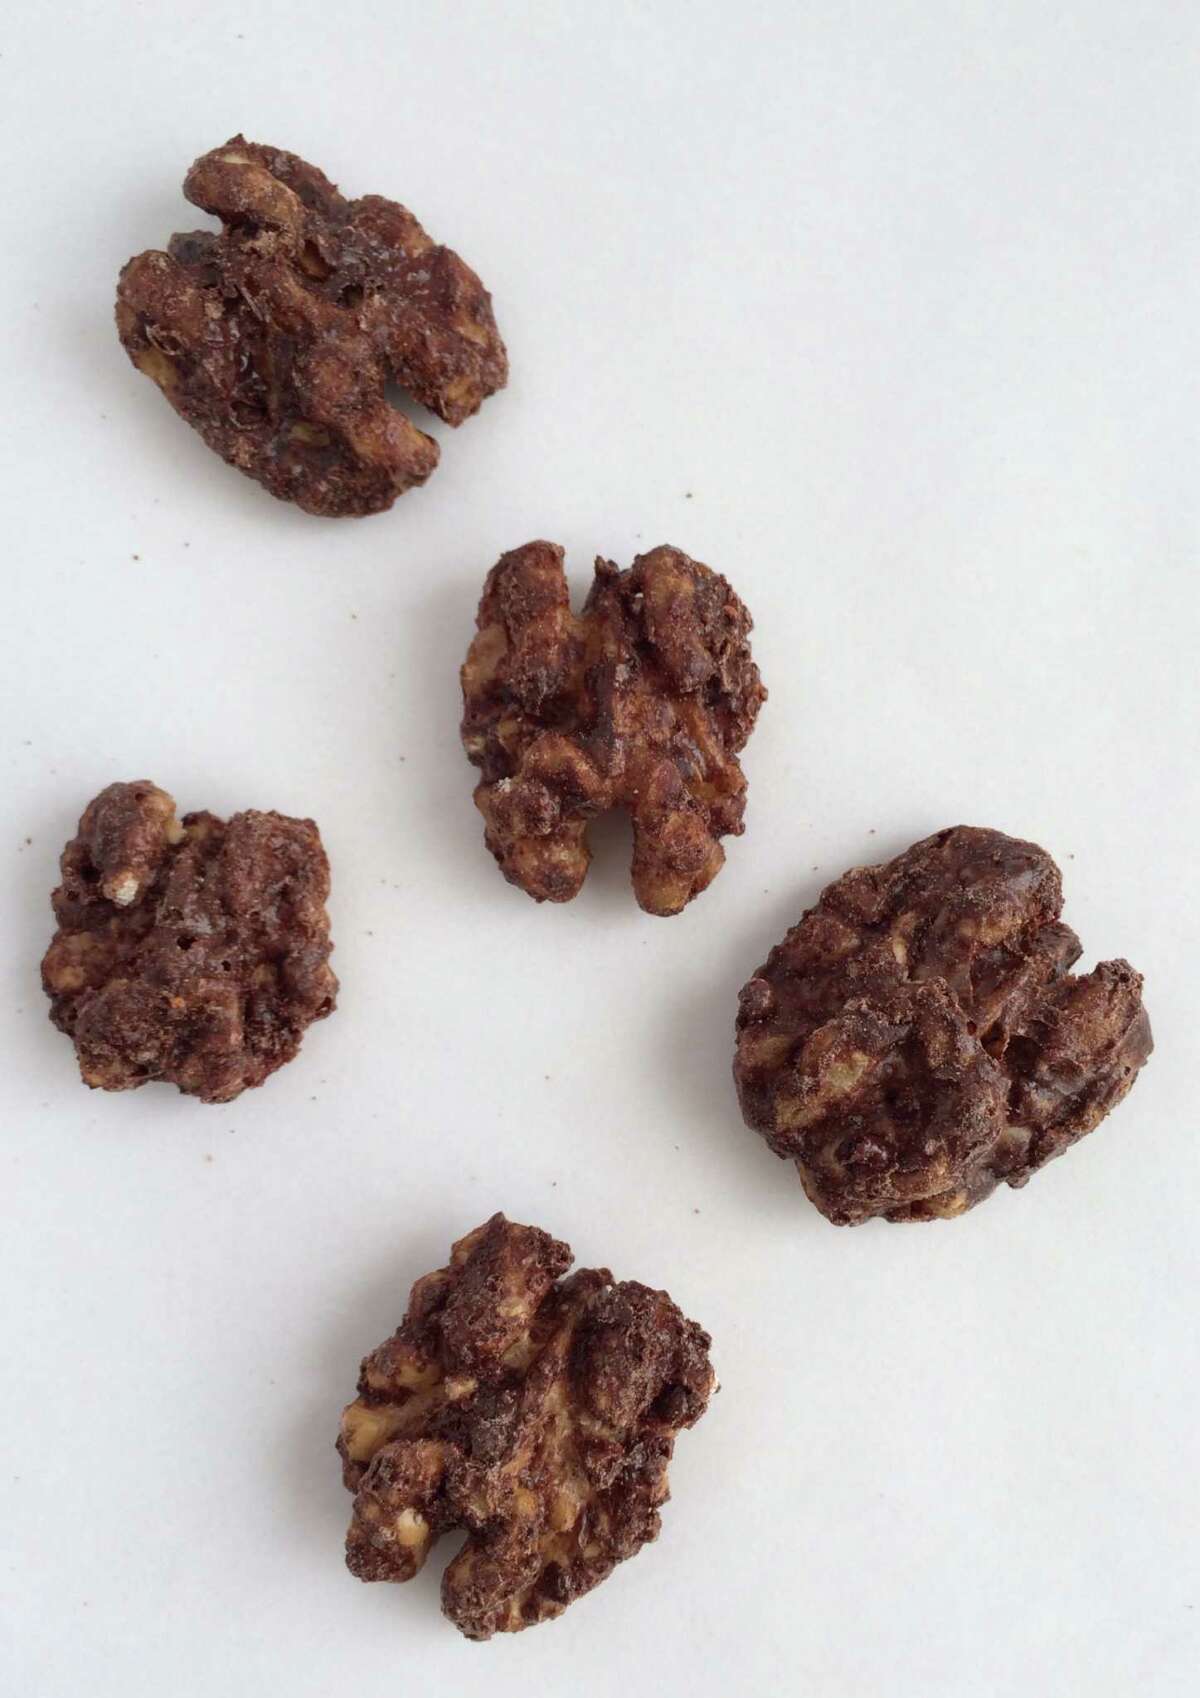 Old Dog Ranch’s Mexican’hot’chocolate-flavored walnuts.